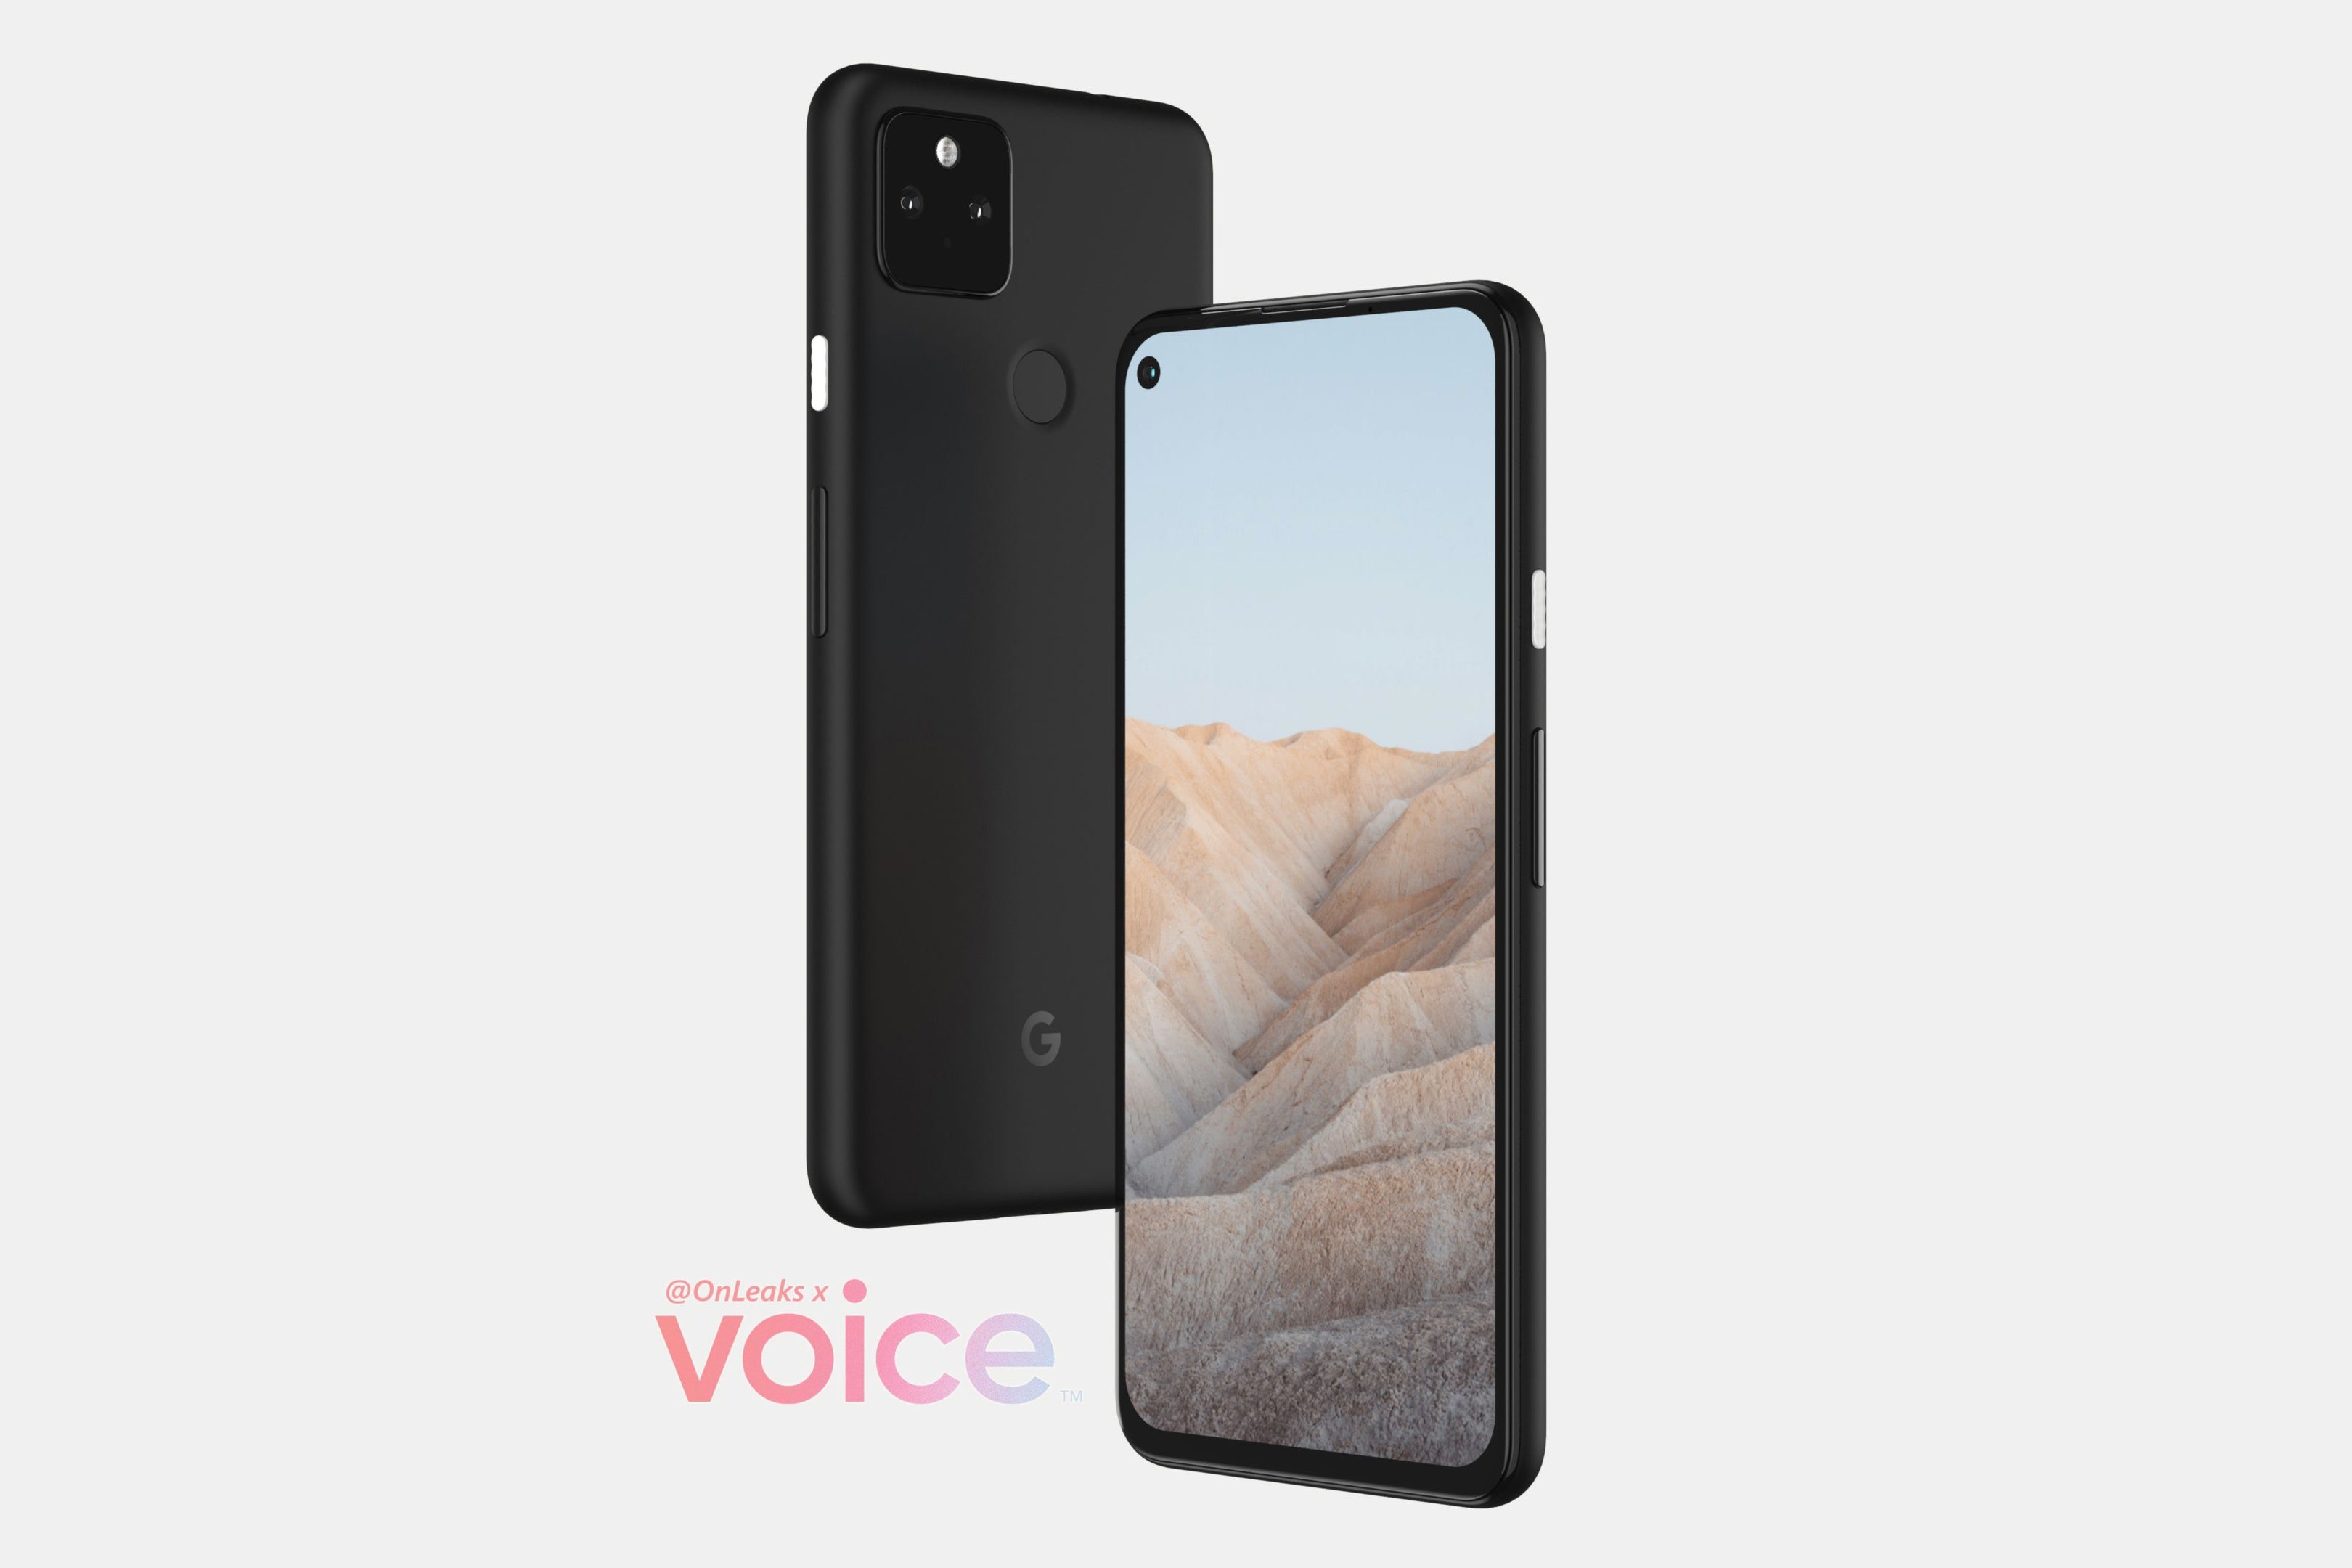 Leaked Google Pixel 5a CAD-based renders - The date of Google's Pixel 5a announcement event may have just leaked